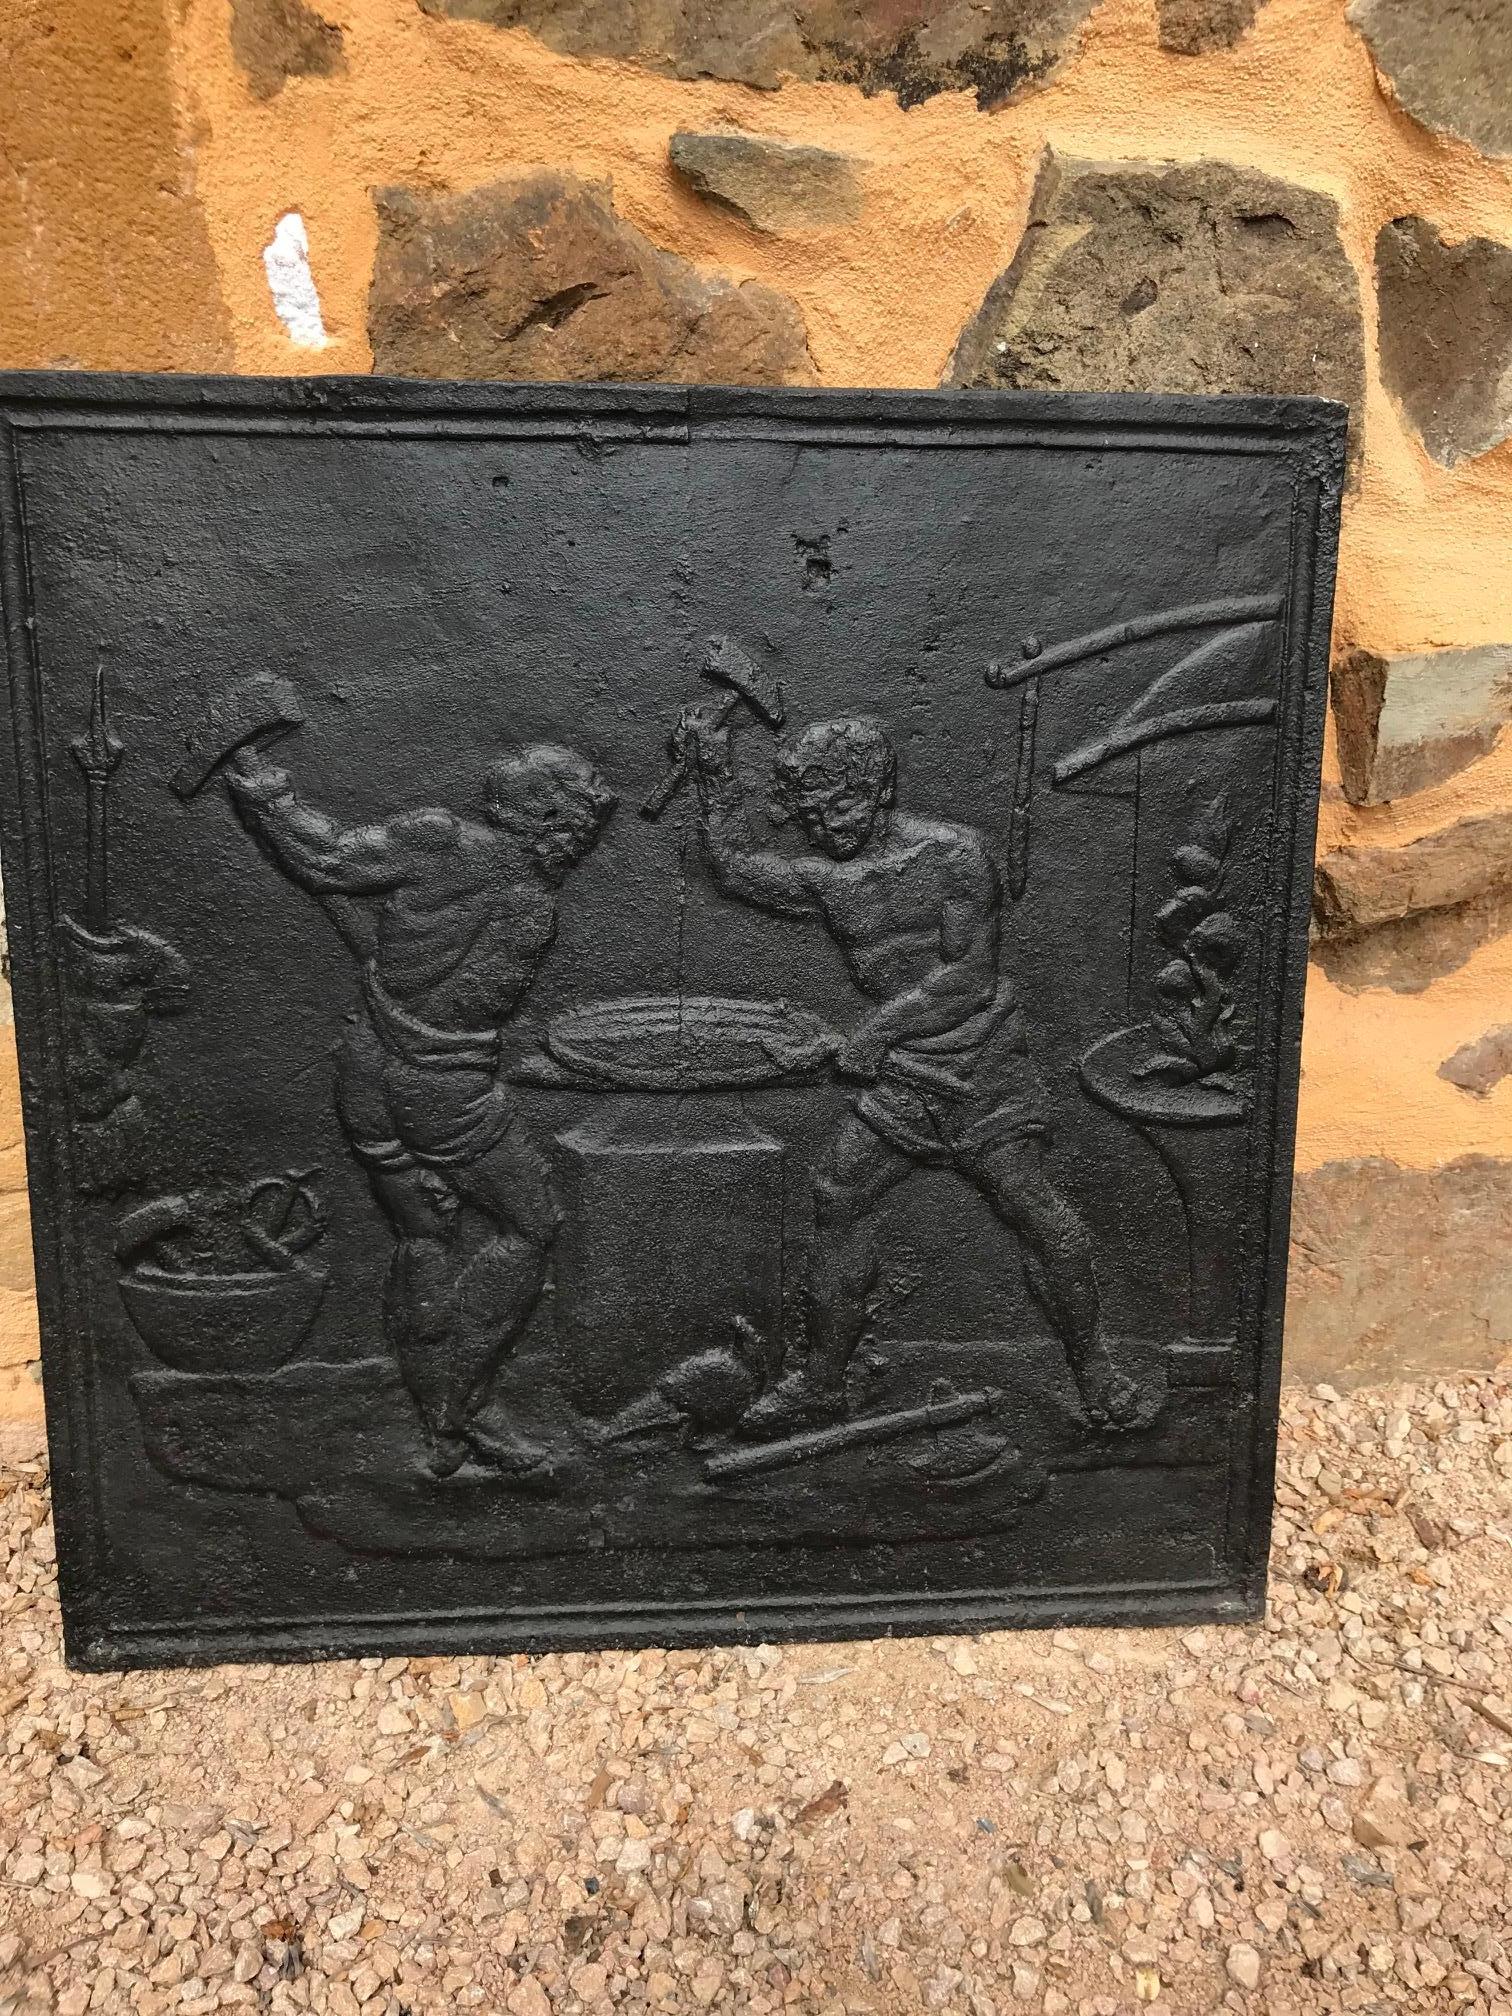 Beautiful 18th century cast iron fireplace Screen representing Greek working black-smith.
There is a Greek armor on the left and the fireplace on the right.
Rare piece in very good condition.